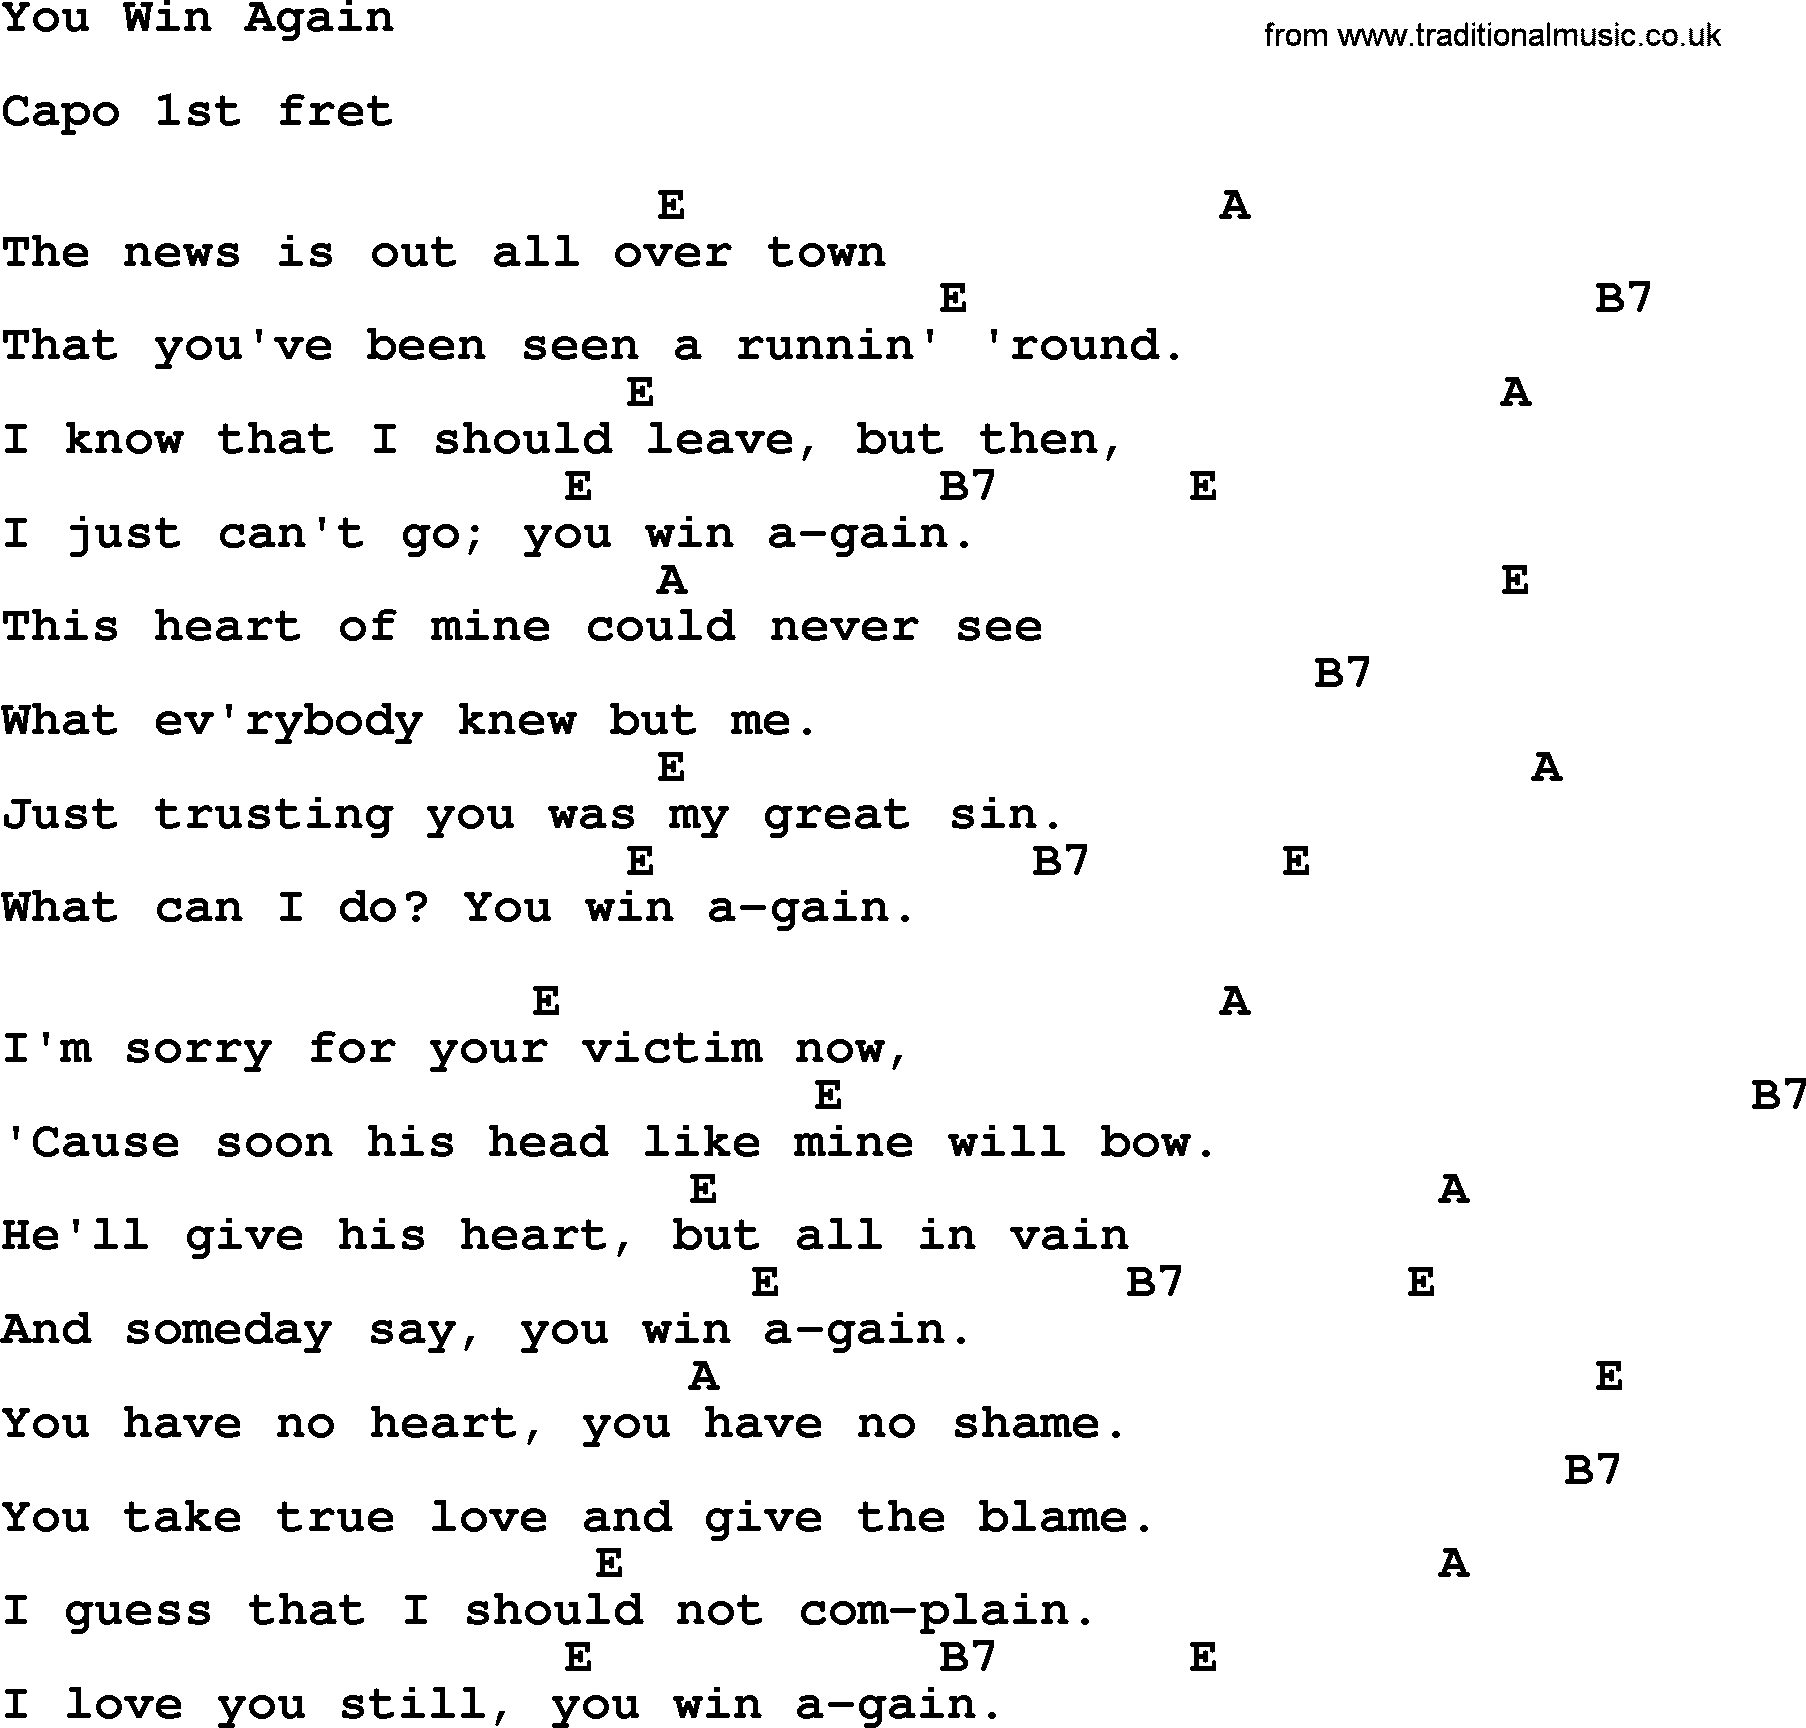 Johnny Cash song You Win Again, lyrics and chords